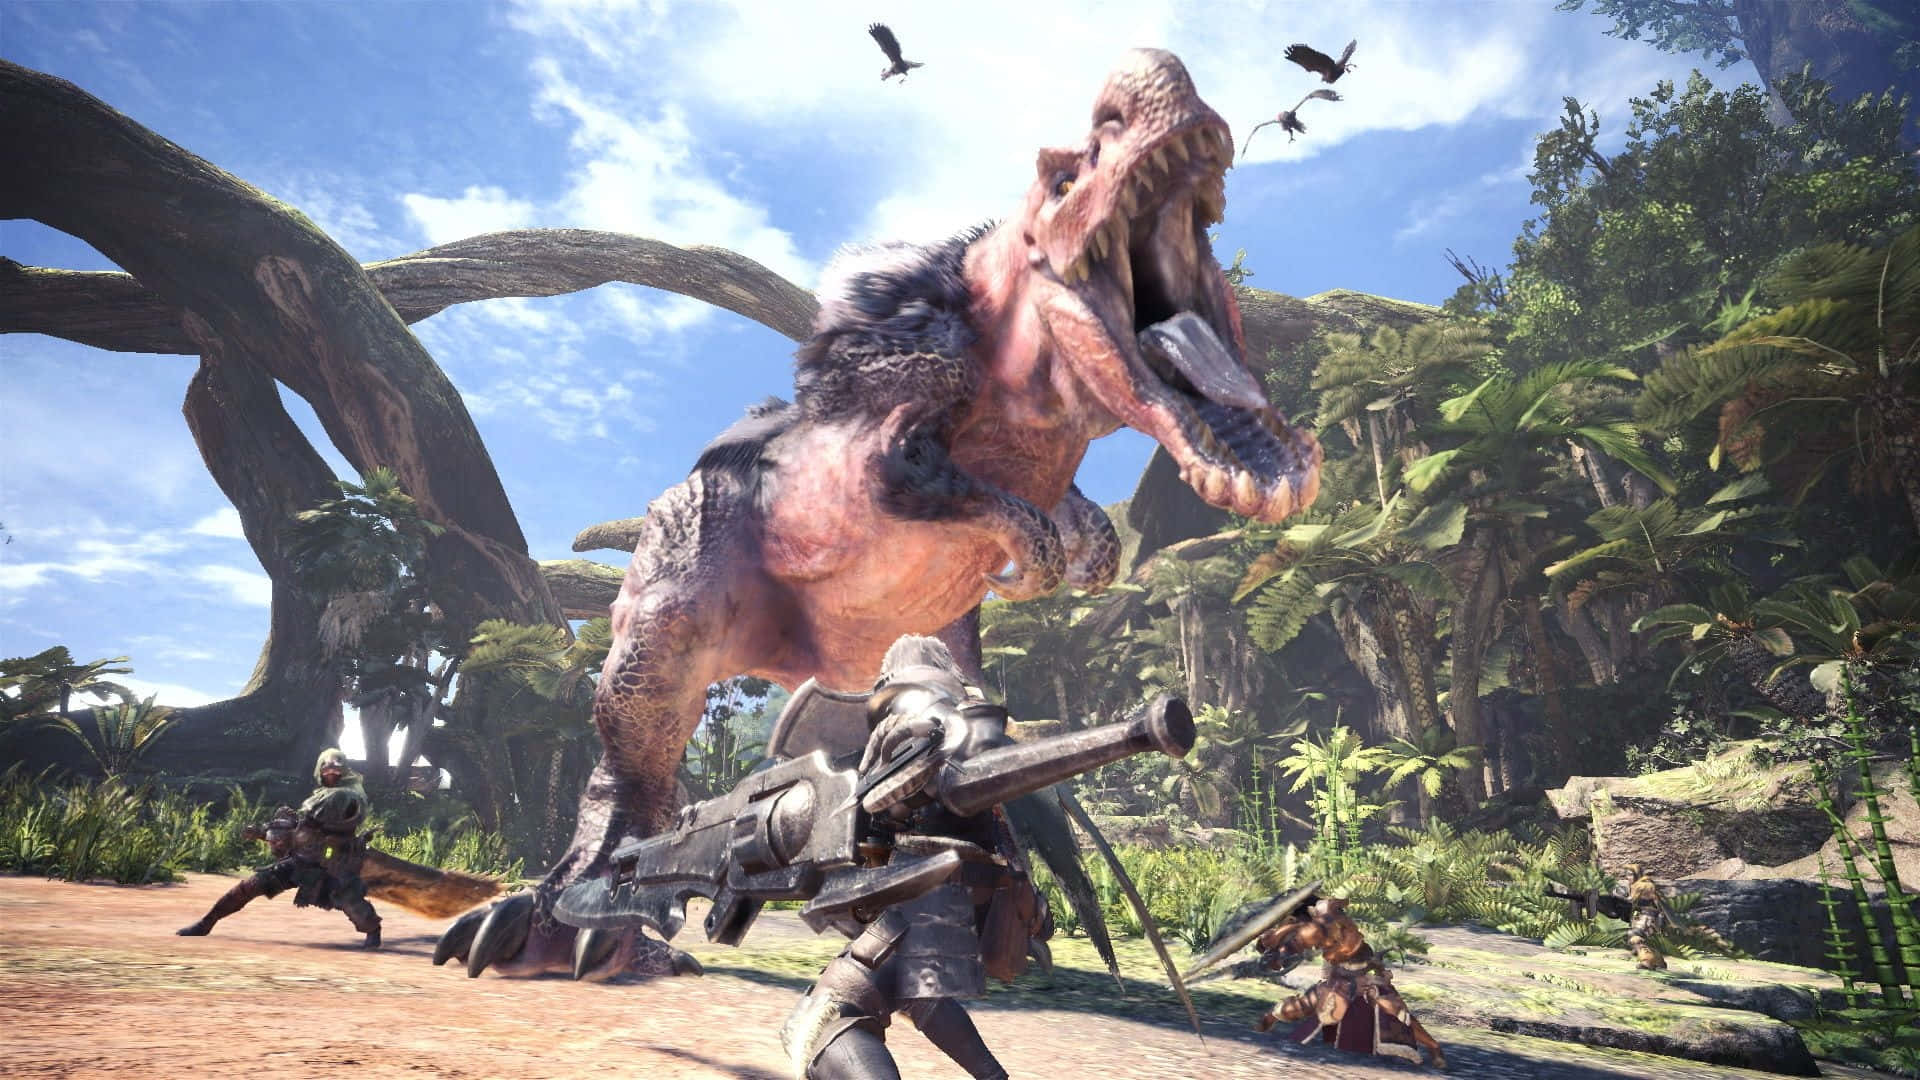 Monster Hunter World – Stakes Are High in This Epic Adventure